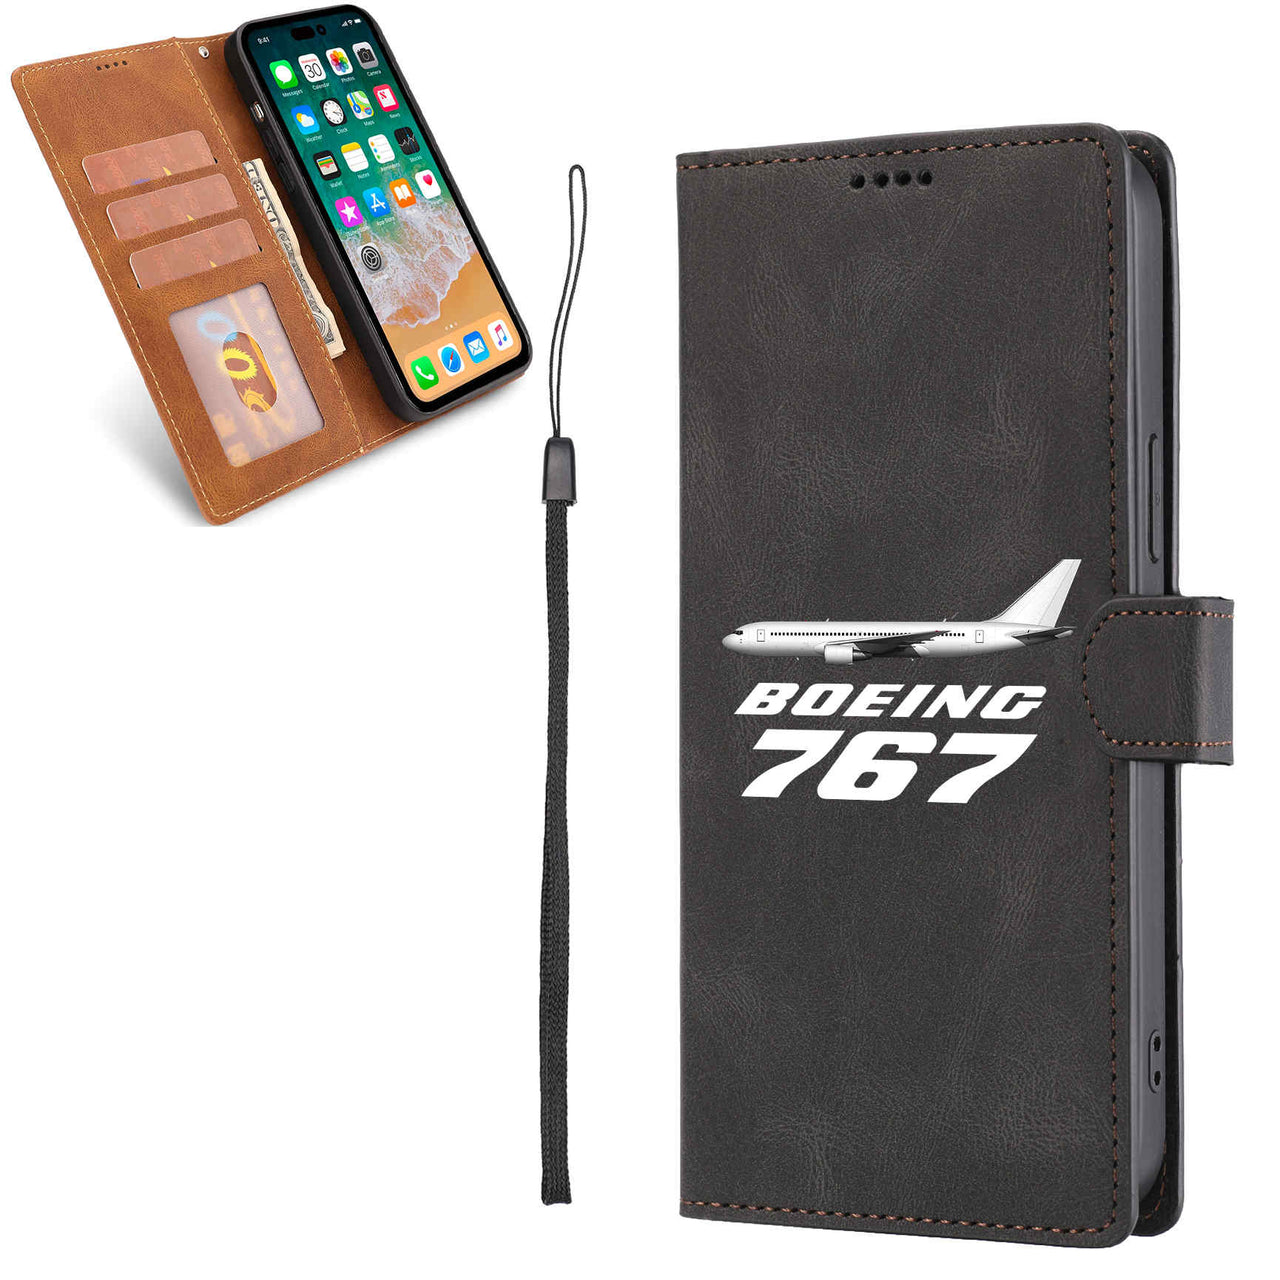 The Boeing 767 Leather Samsung A Cases